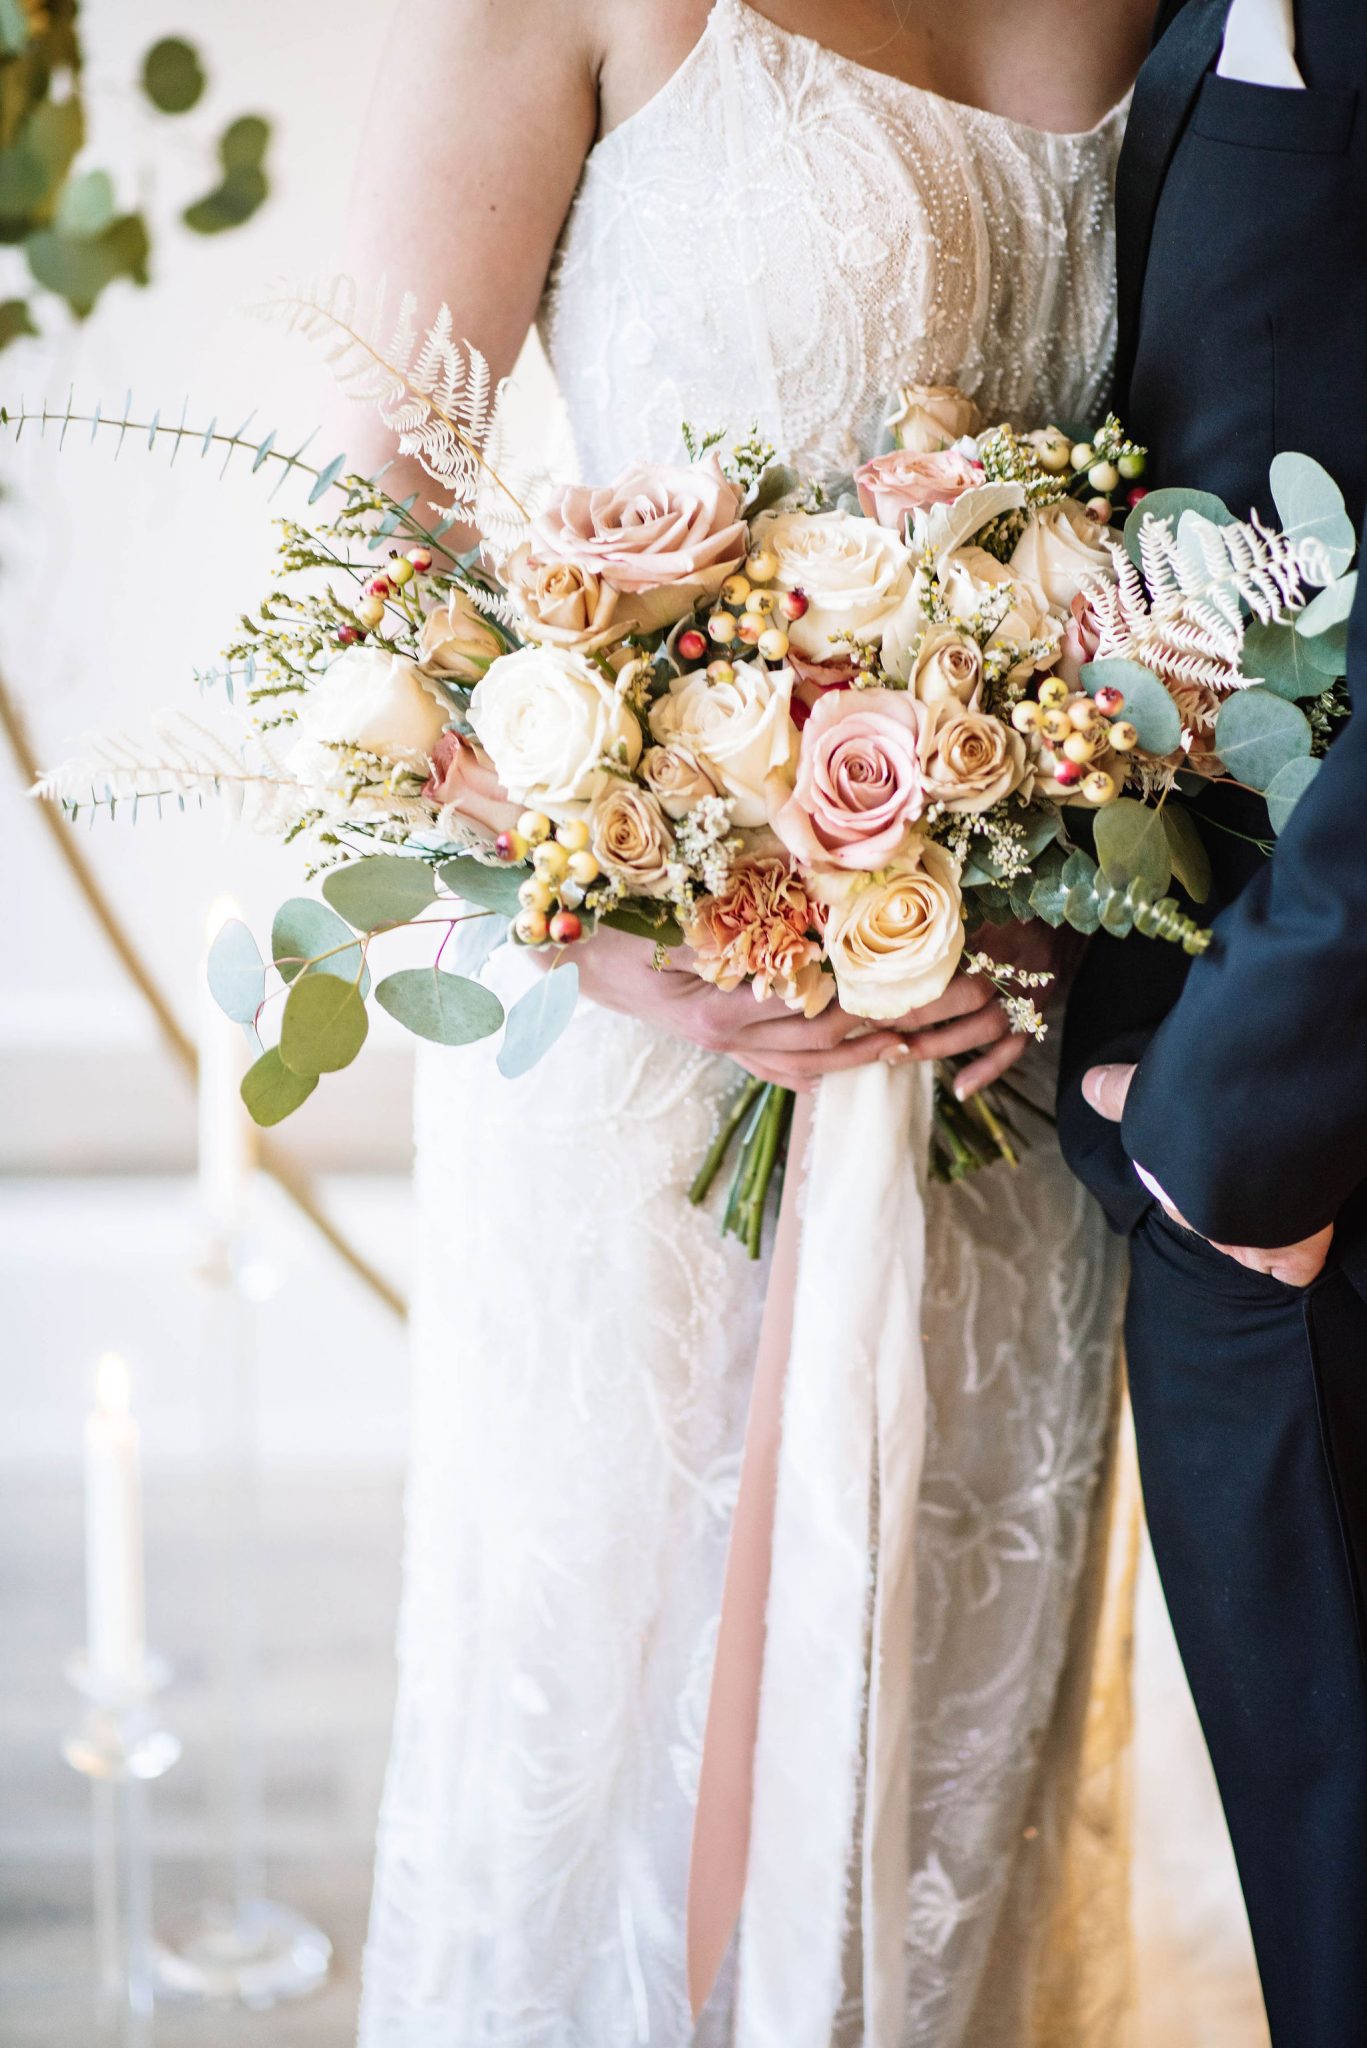 Blush bridal bouquet inspiration with antique carnations, spray roses and quicksand roses